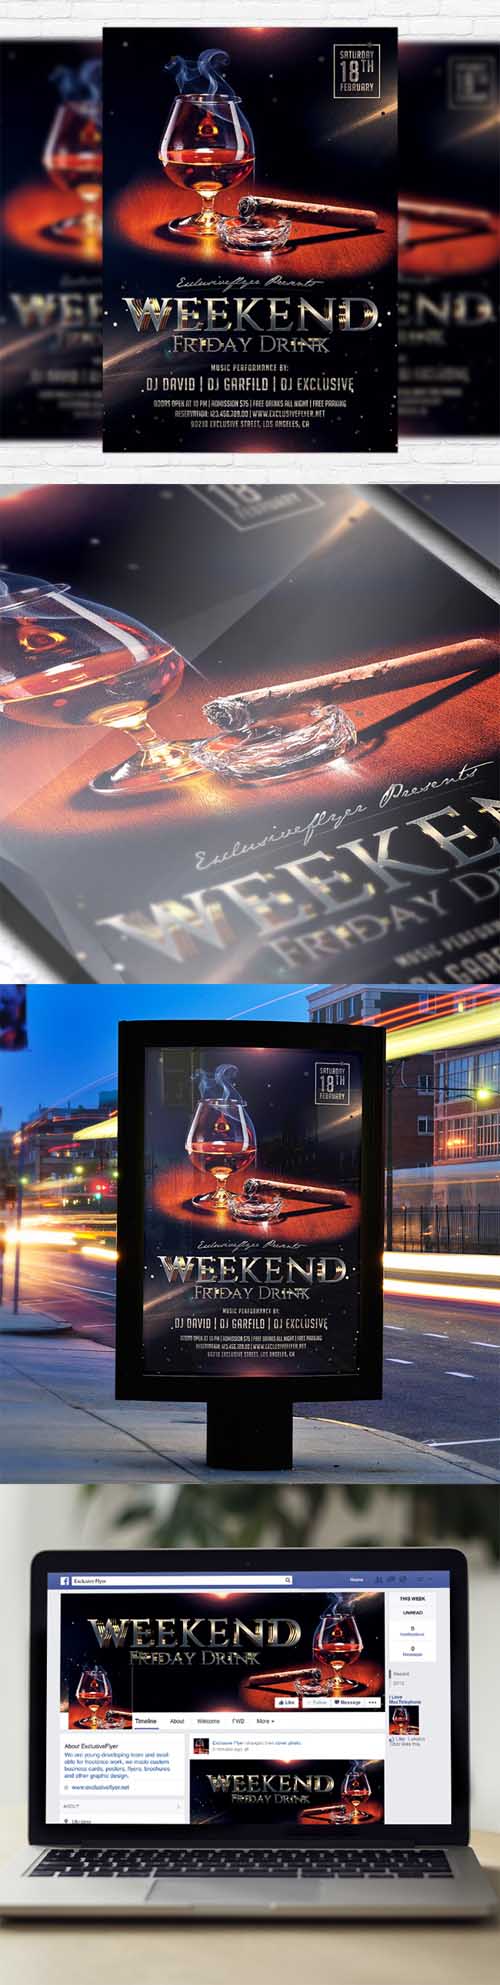 Flyer Template - Weekend Friday Drink + Facebook Cover